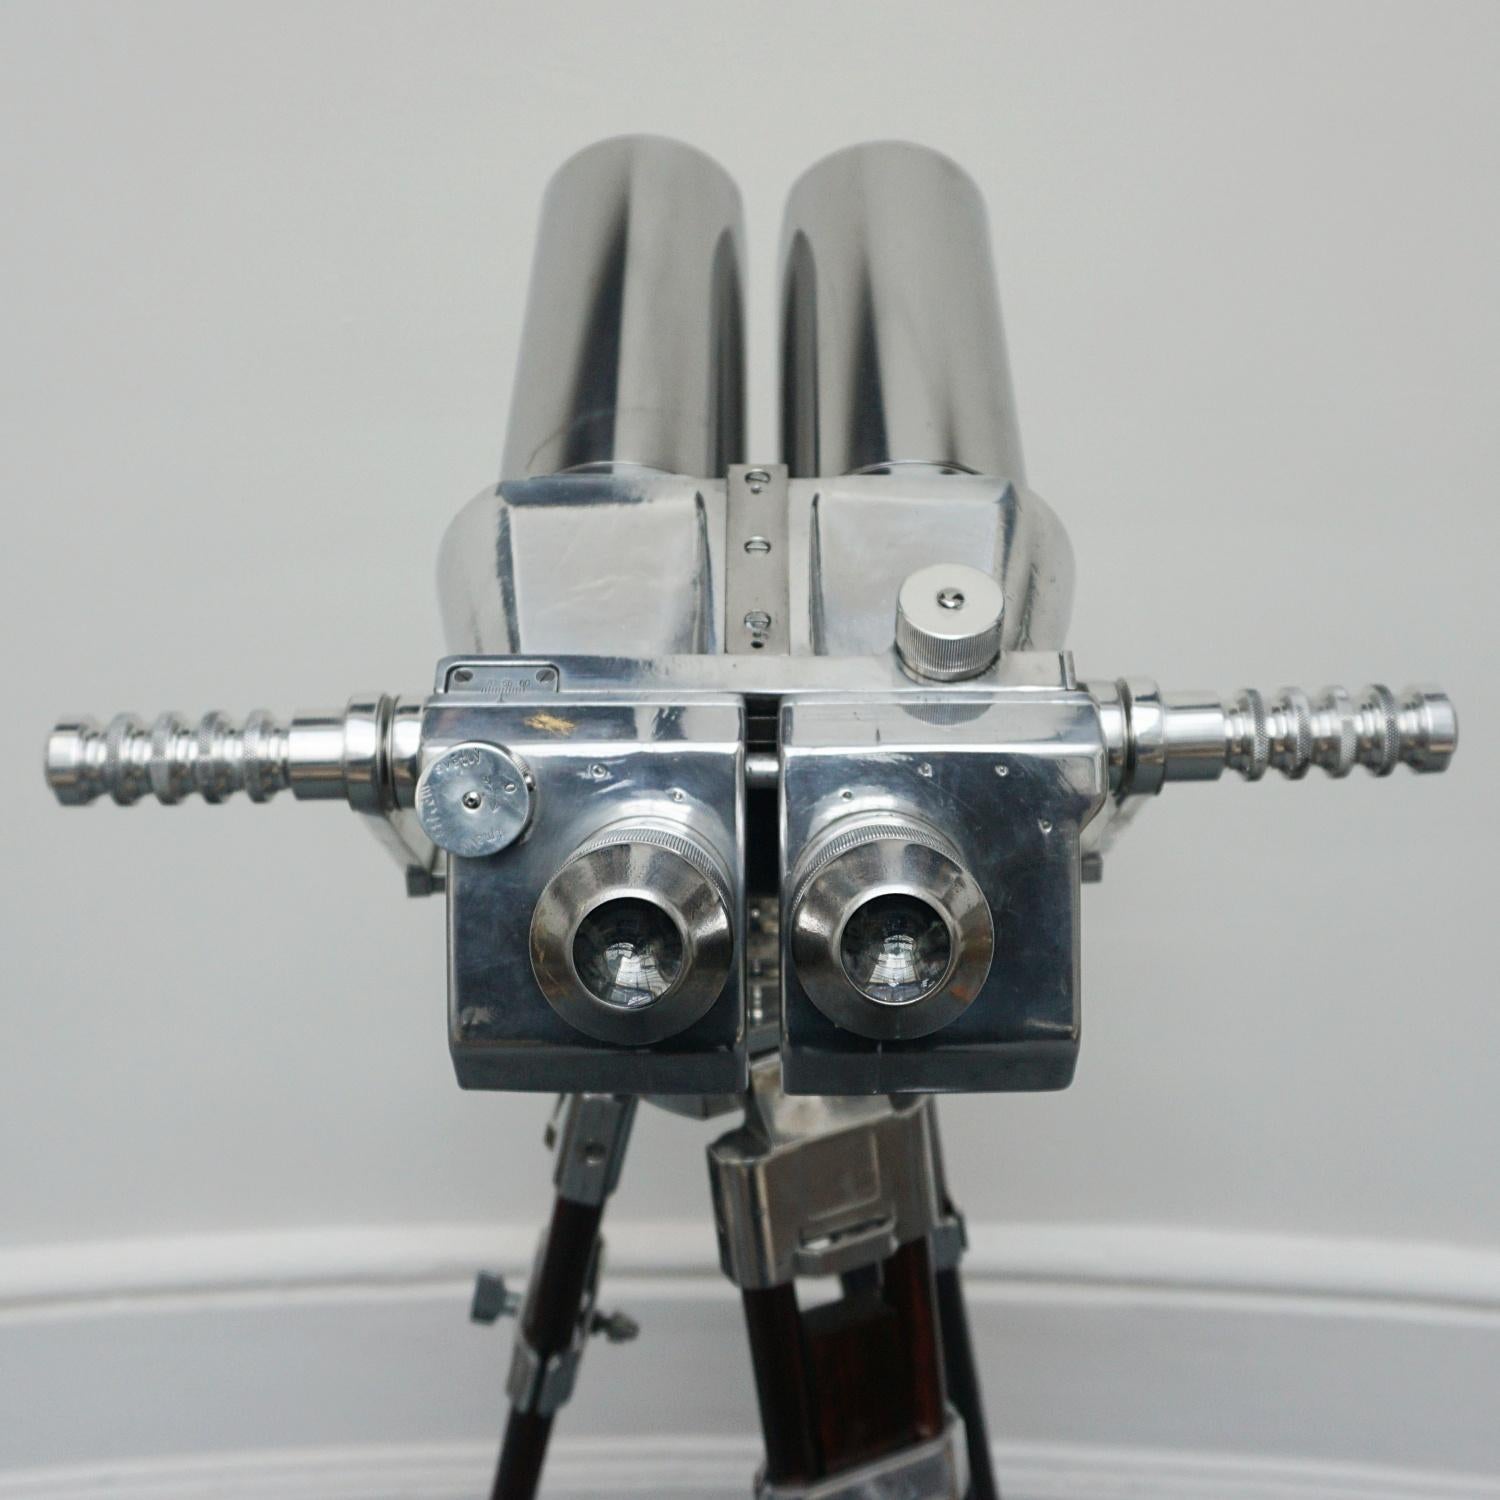 20th Century Pair of Observation Binoculars Designed by Emil Busch Optical Industries